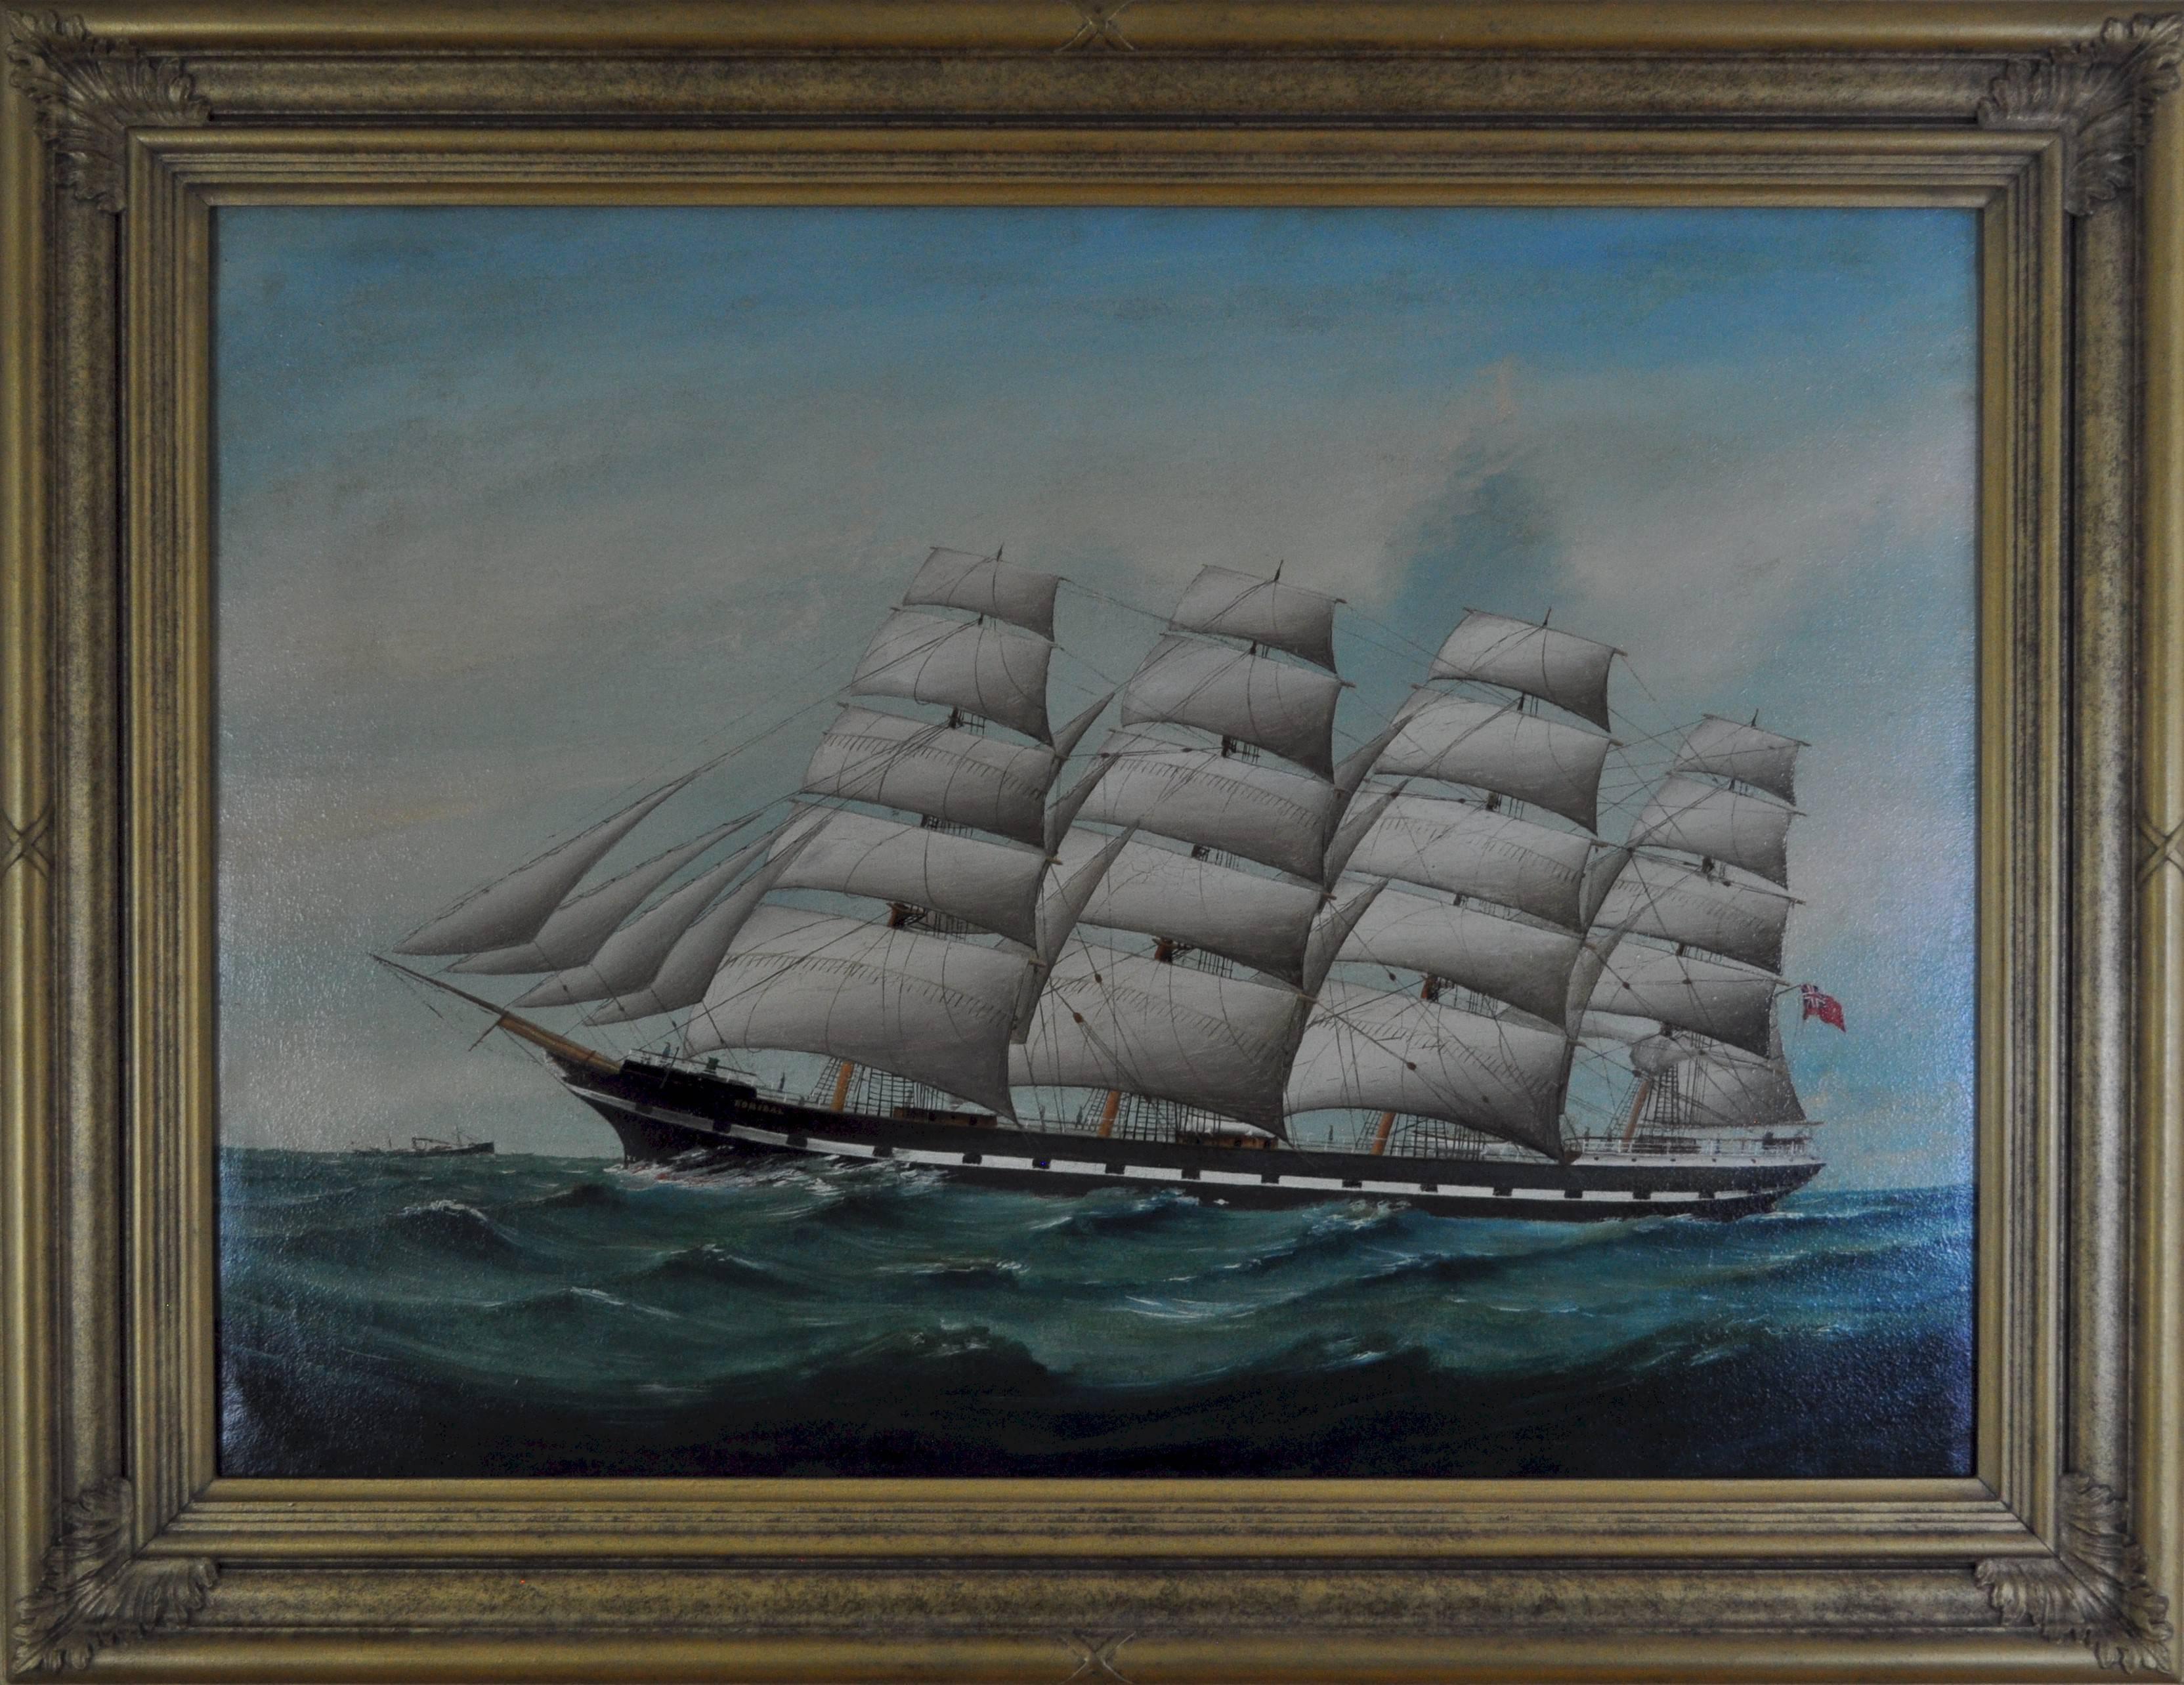 “Romsdal” a four masted barque - Painting by Lai Fong